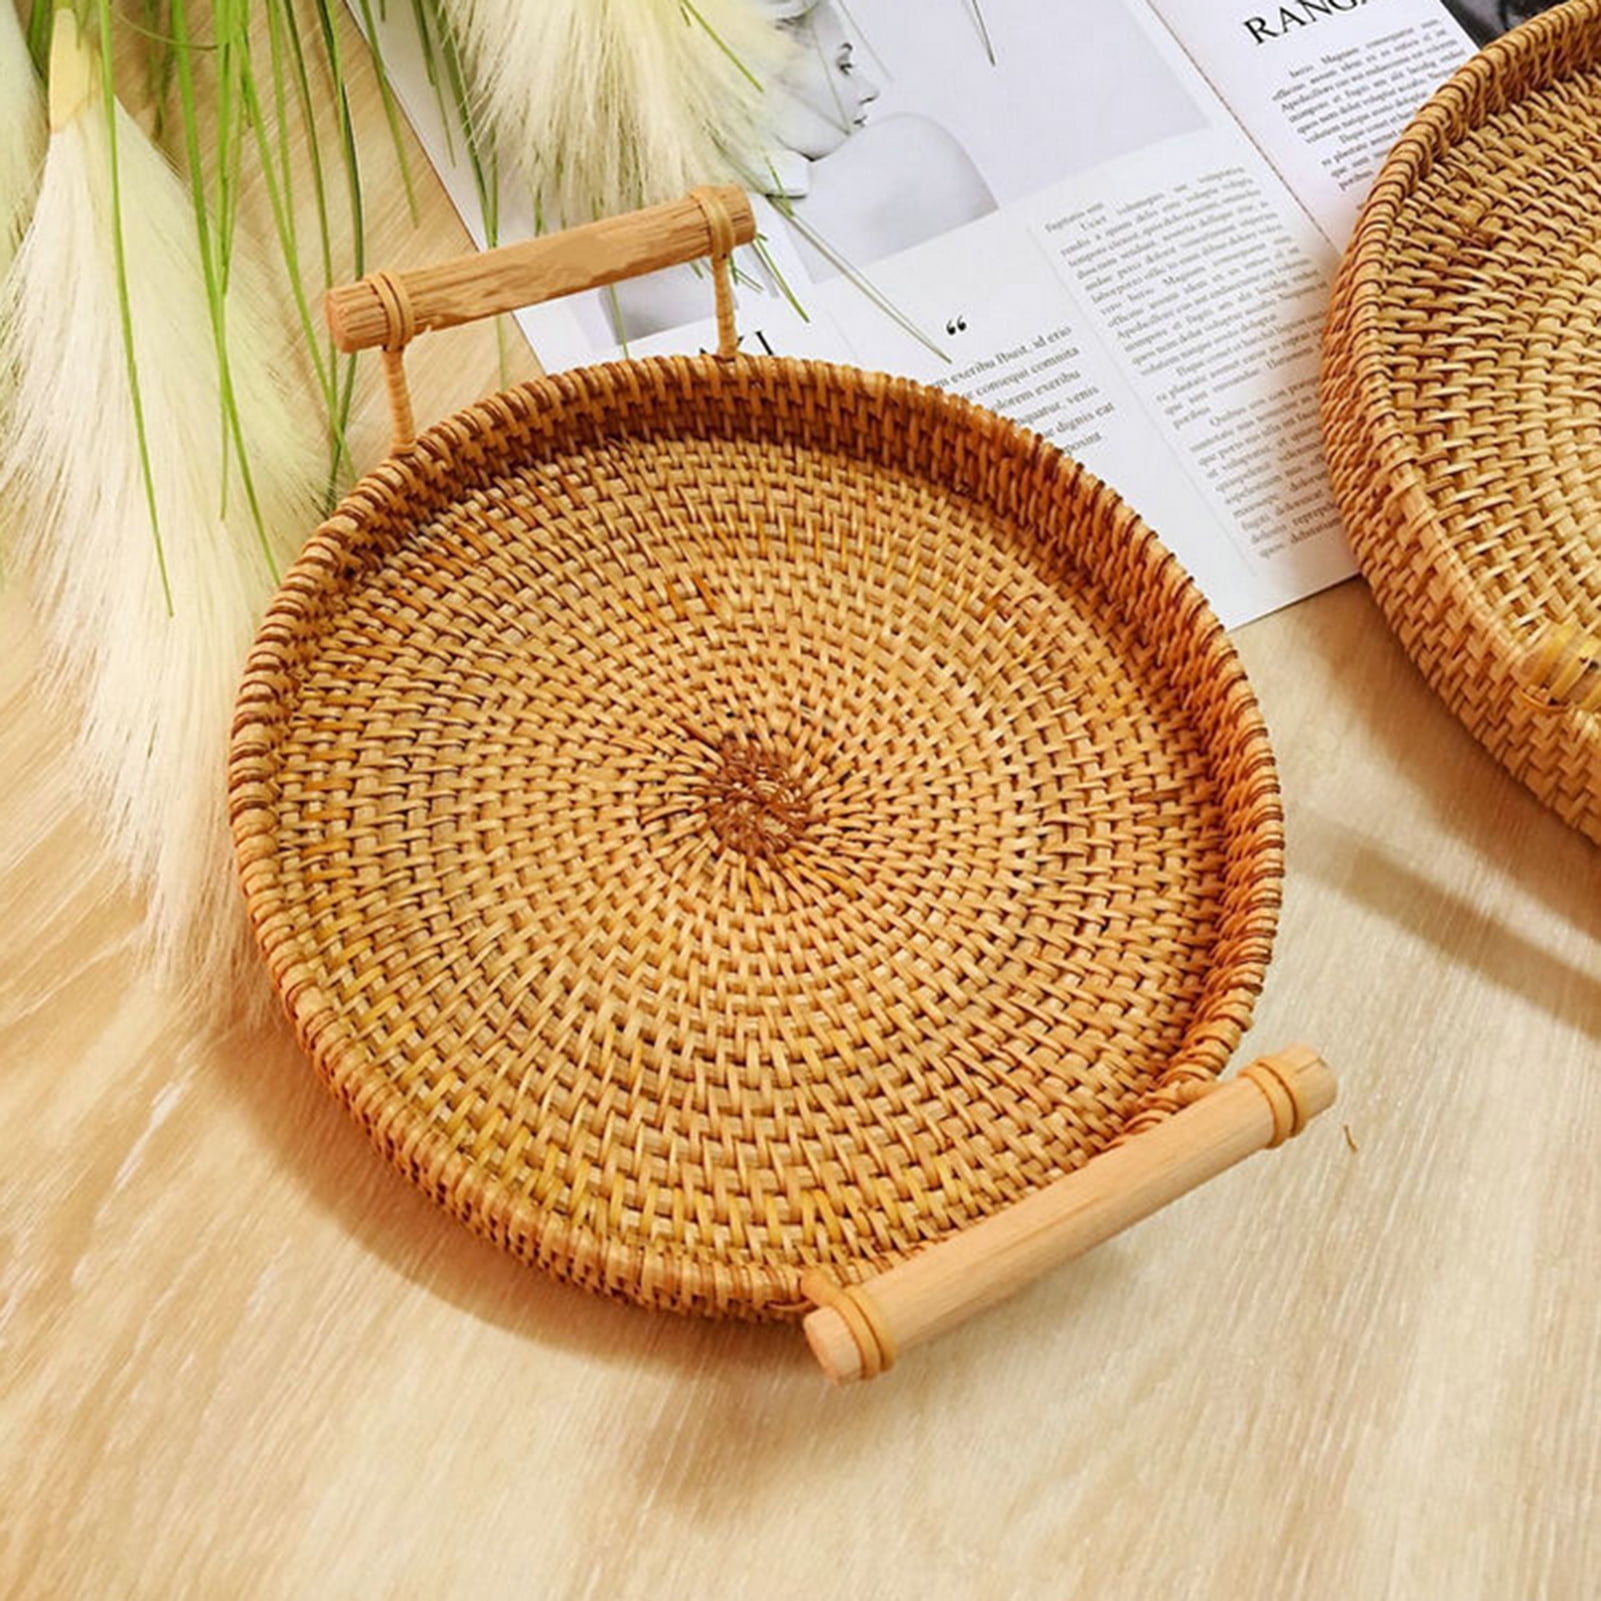 22cm Canghai Rattan Bread Basket Round Biscuit Tray Woven Tea Tray With Handle Suitable For Dinner Party Coffee Breakfast 